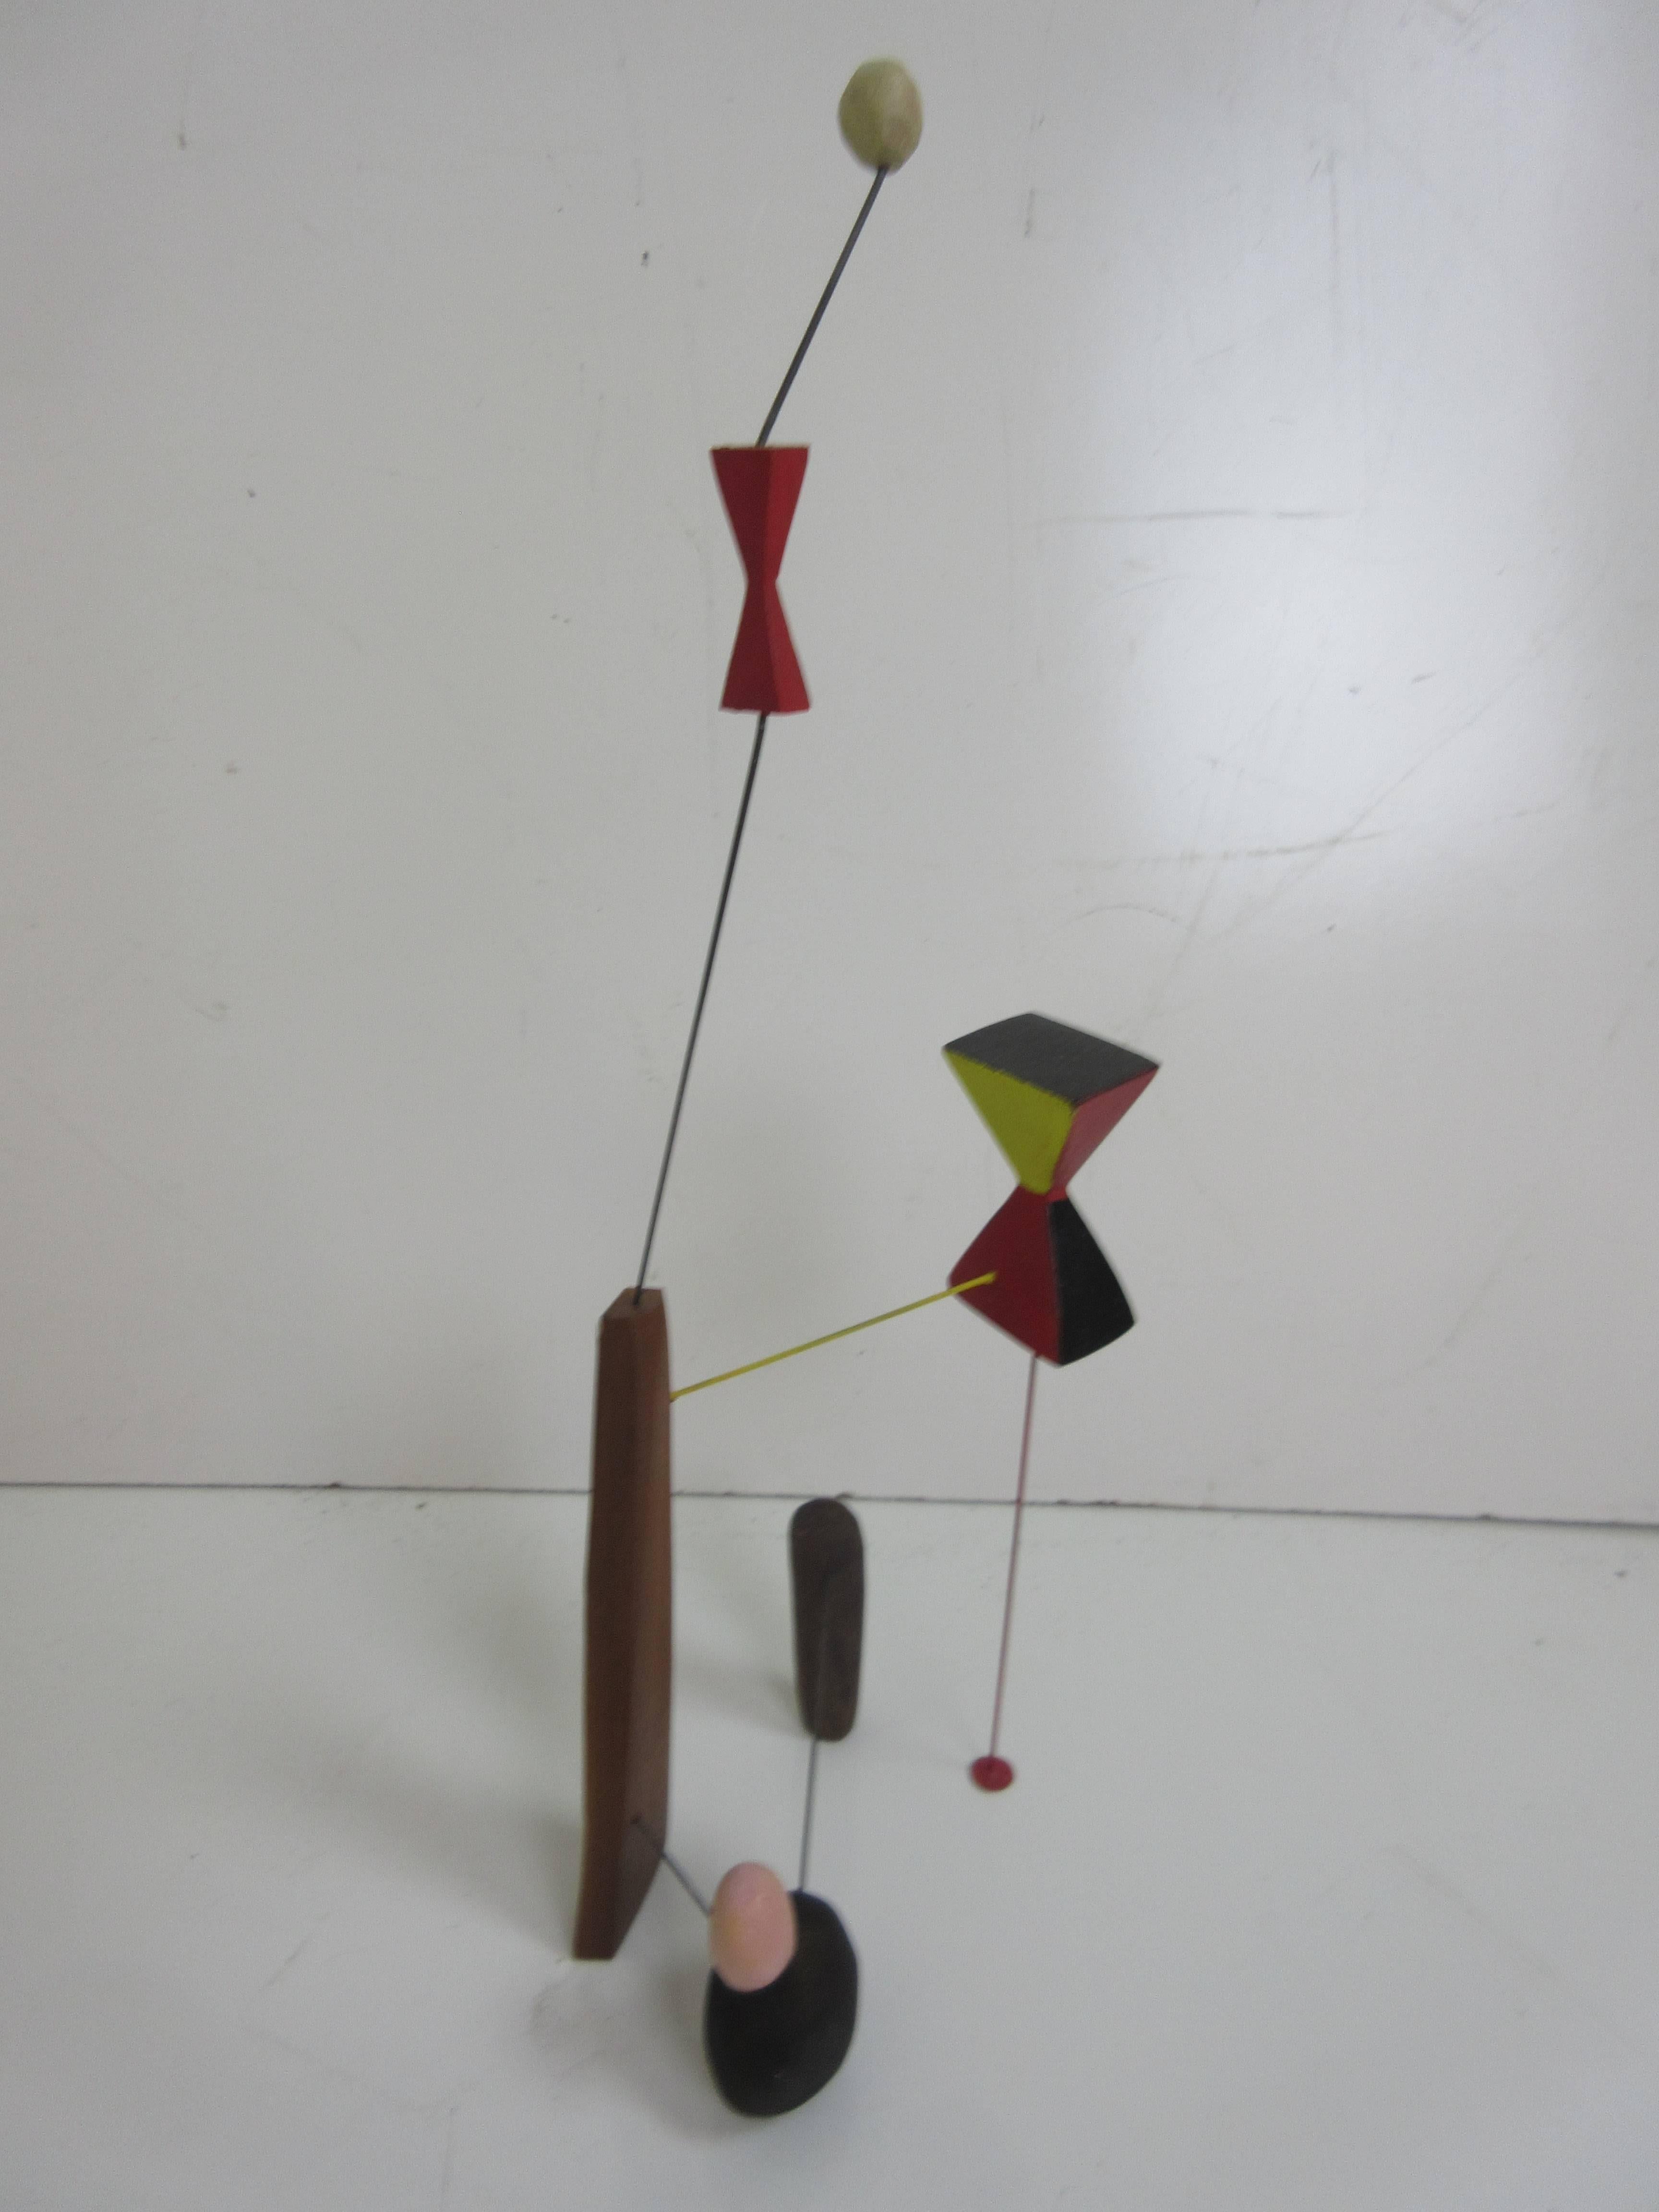 Adam Henderson sculpture constellation of wire, wood and paint. A playful juxtaposition of shapes and colors.